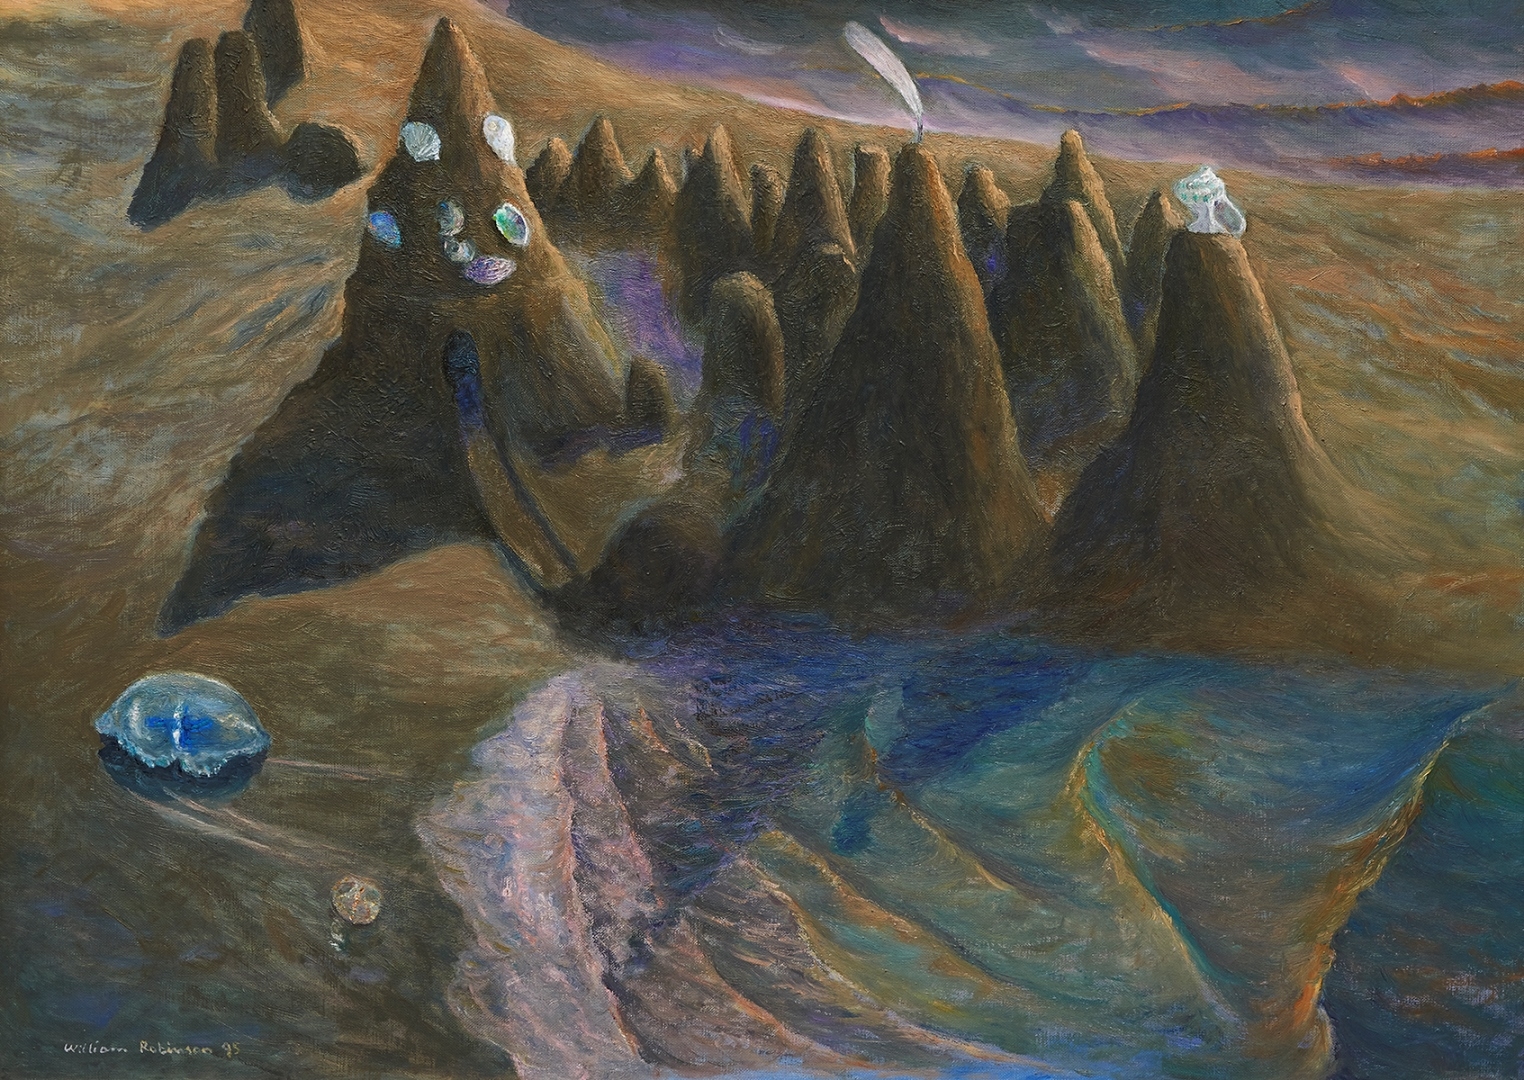 Sandcastles with Shells and Feather by William Robinson, 1995